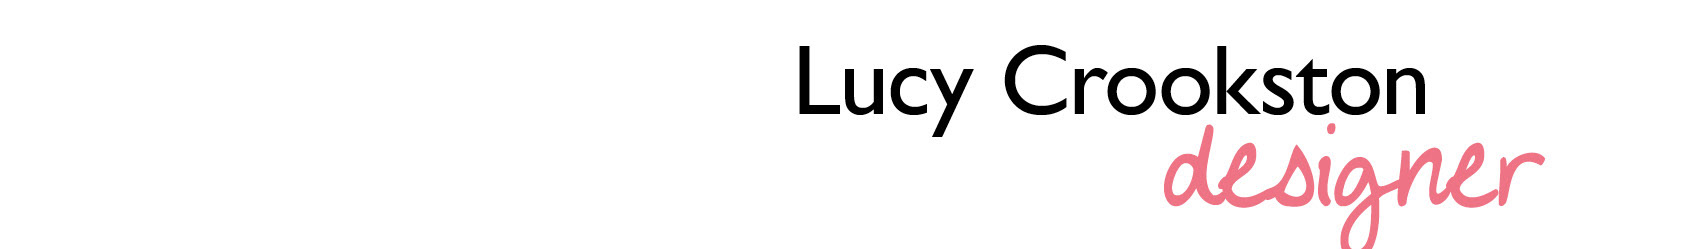 Lucy Crookstons profilbanner